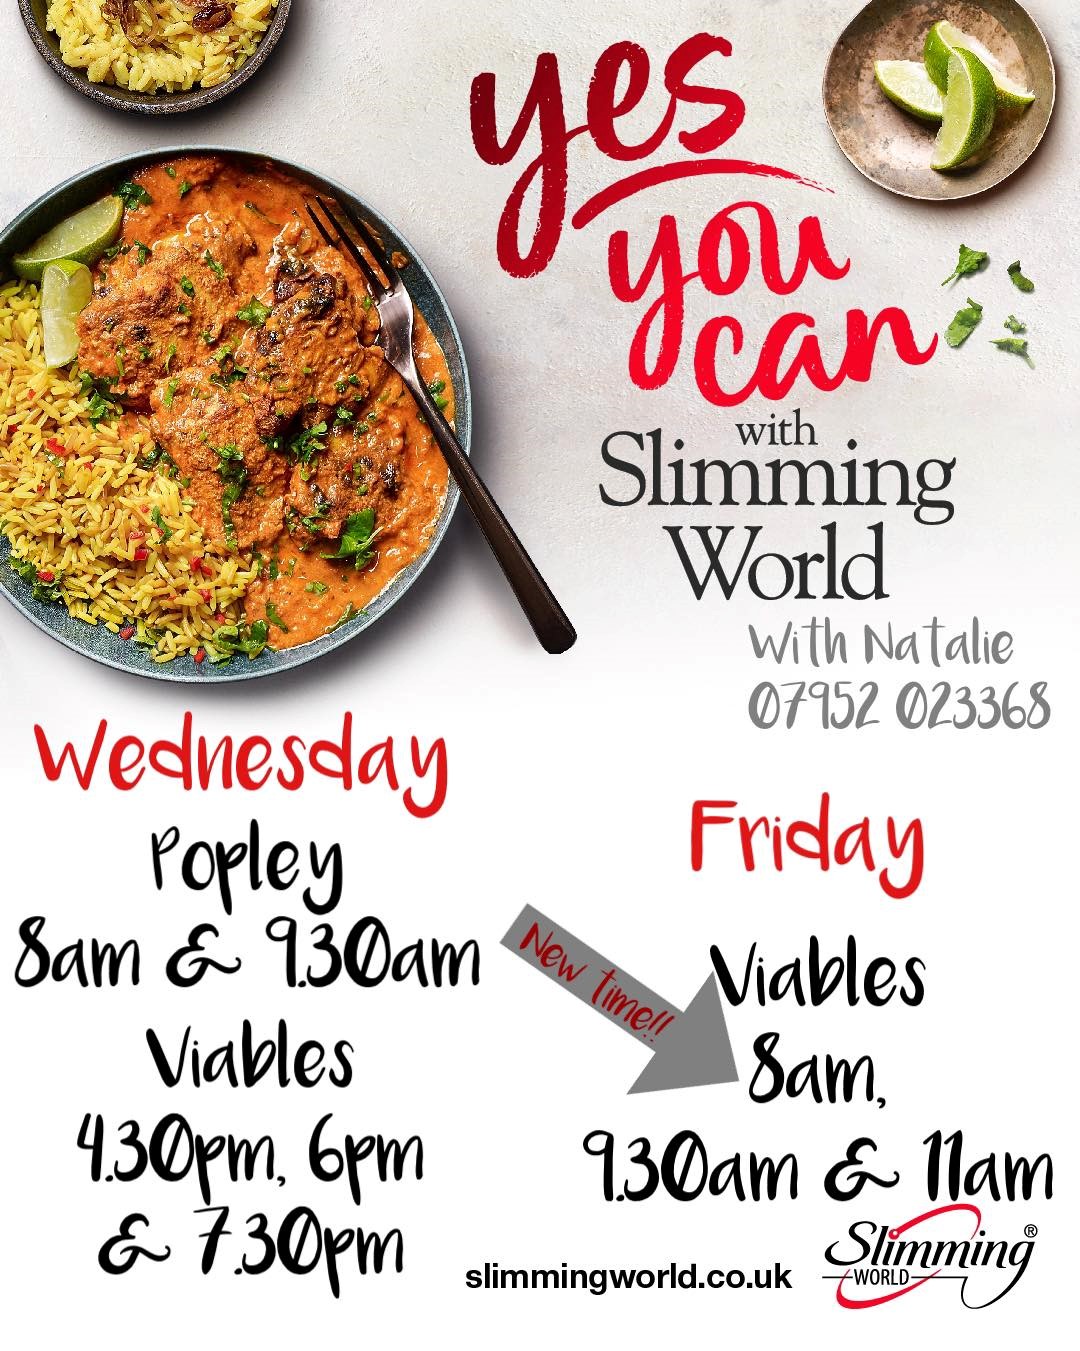 Slimming World with Natalie